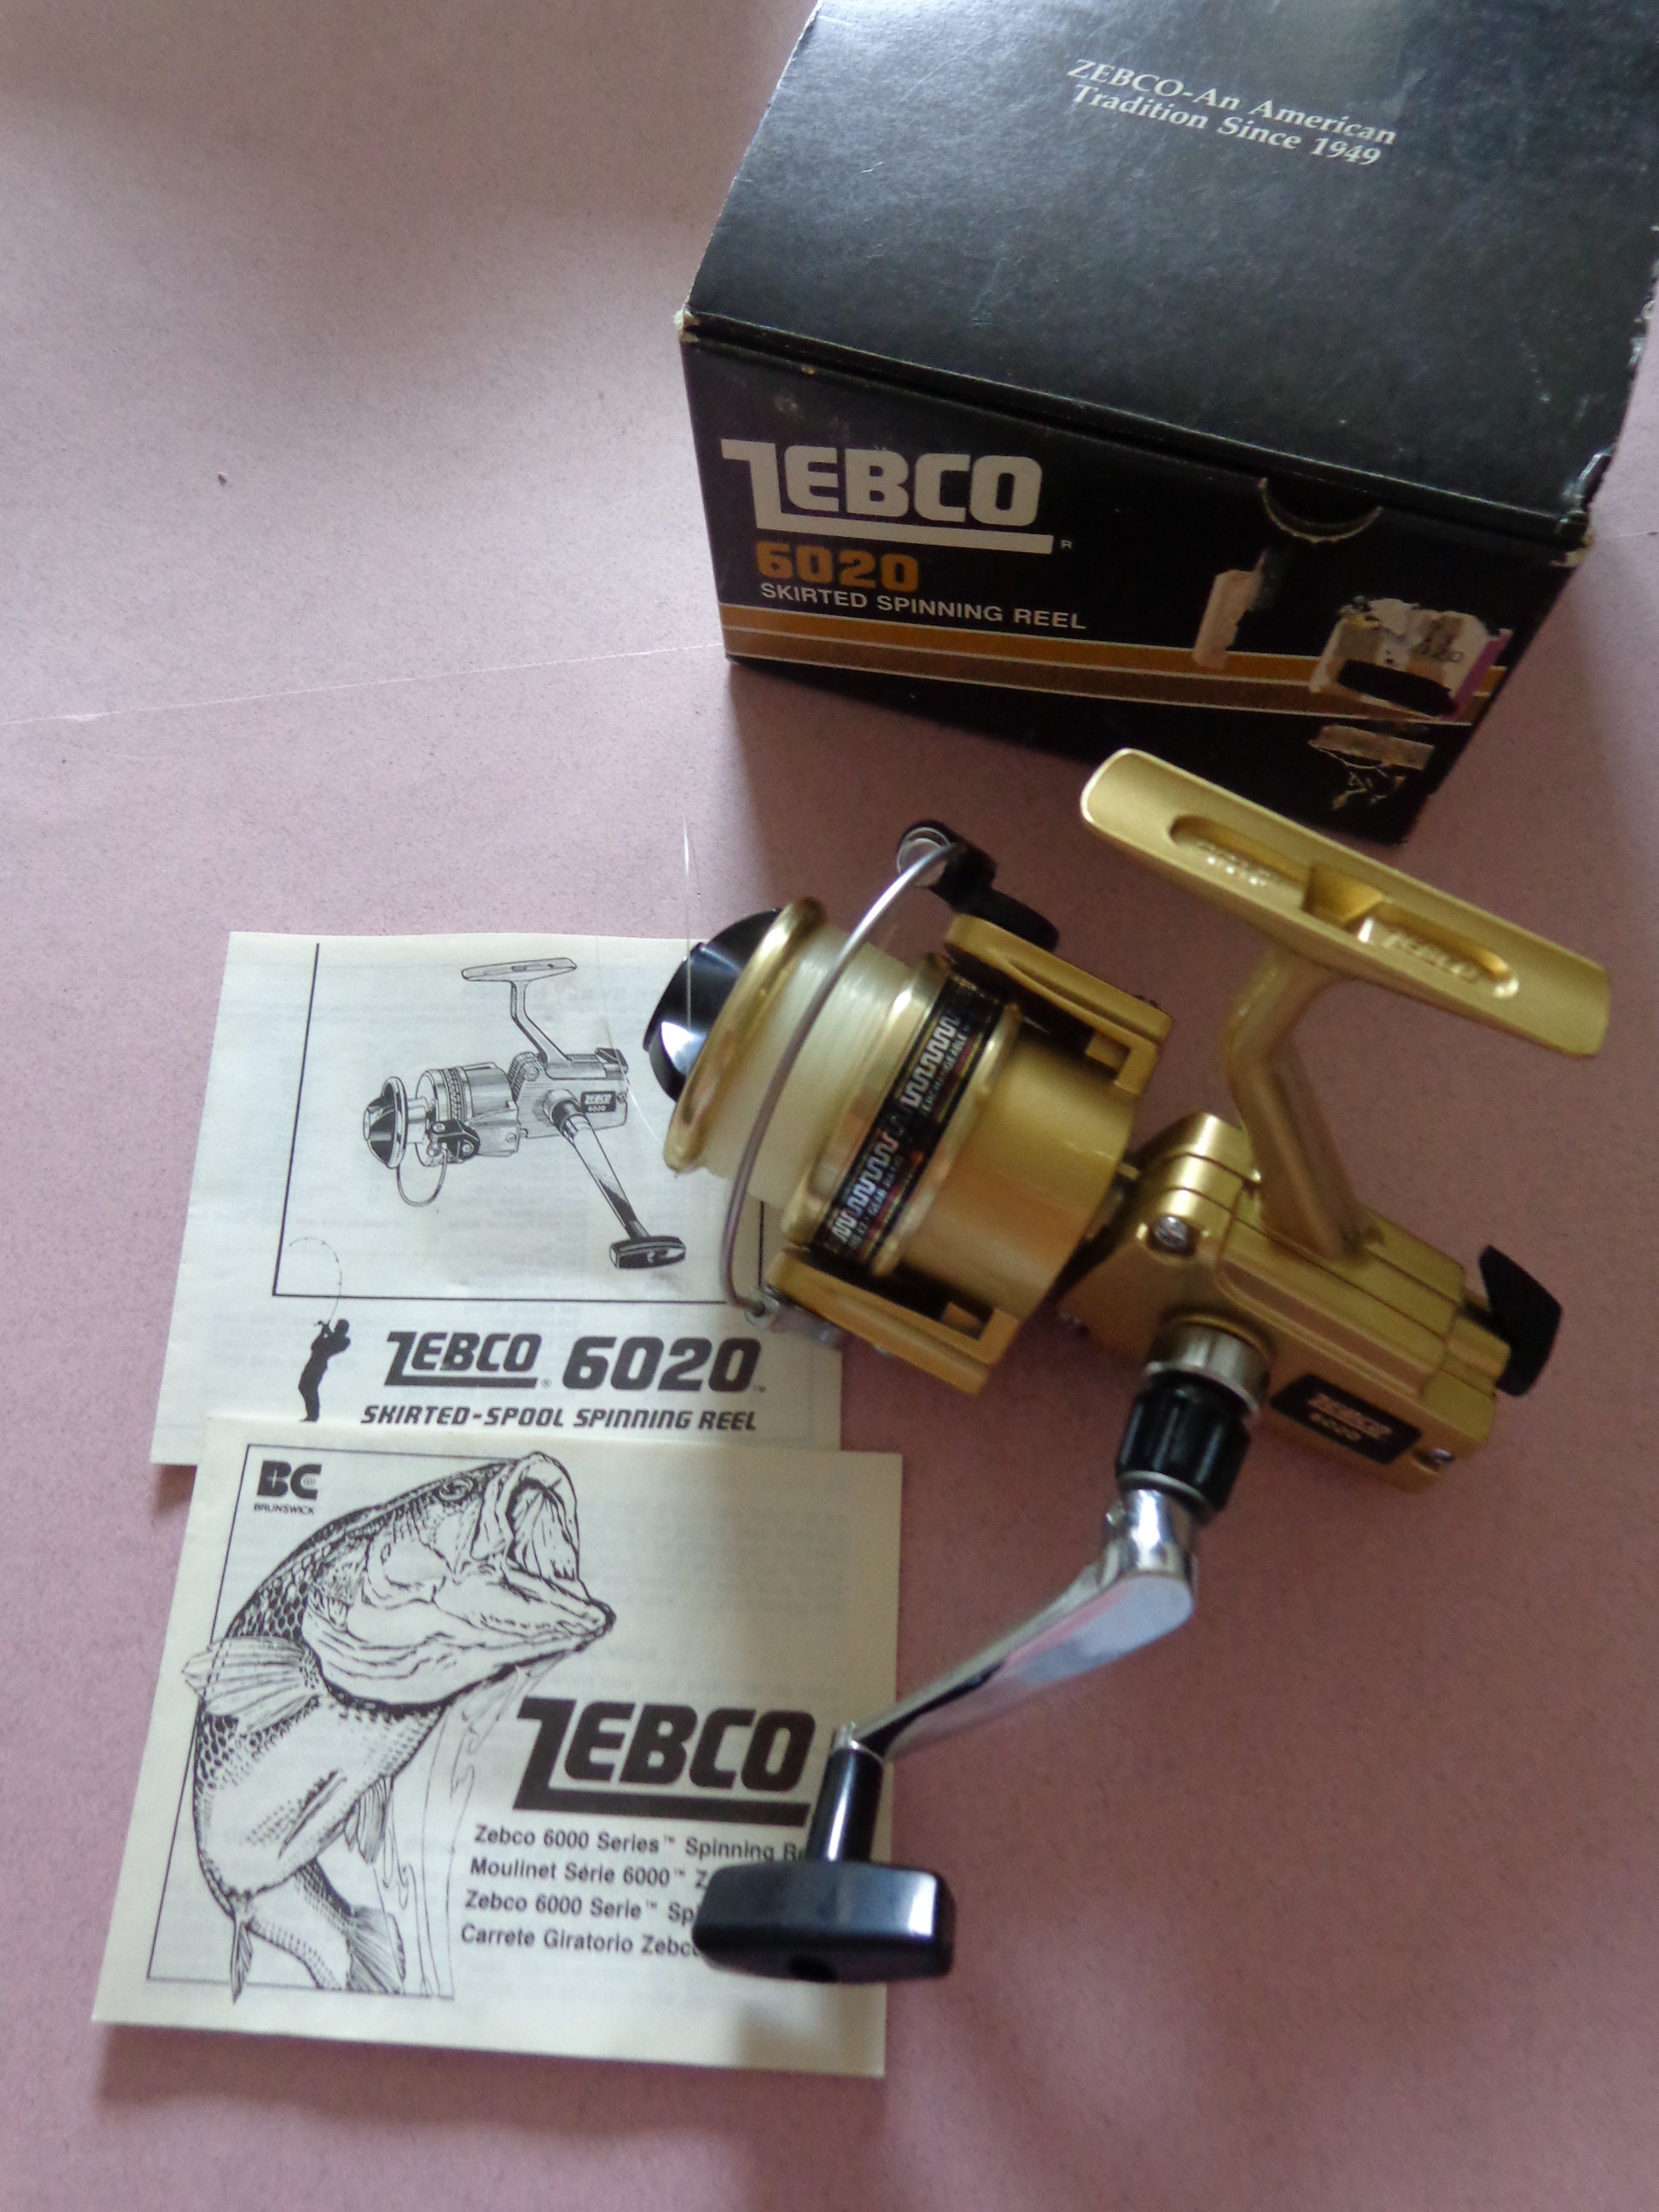 Zebco Fishing Reel, 6020, Skirted Spinning Reel, Left or Right Handed,  Japan, Comes in Original Box 